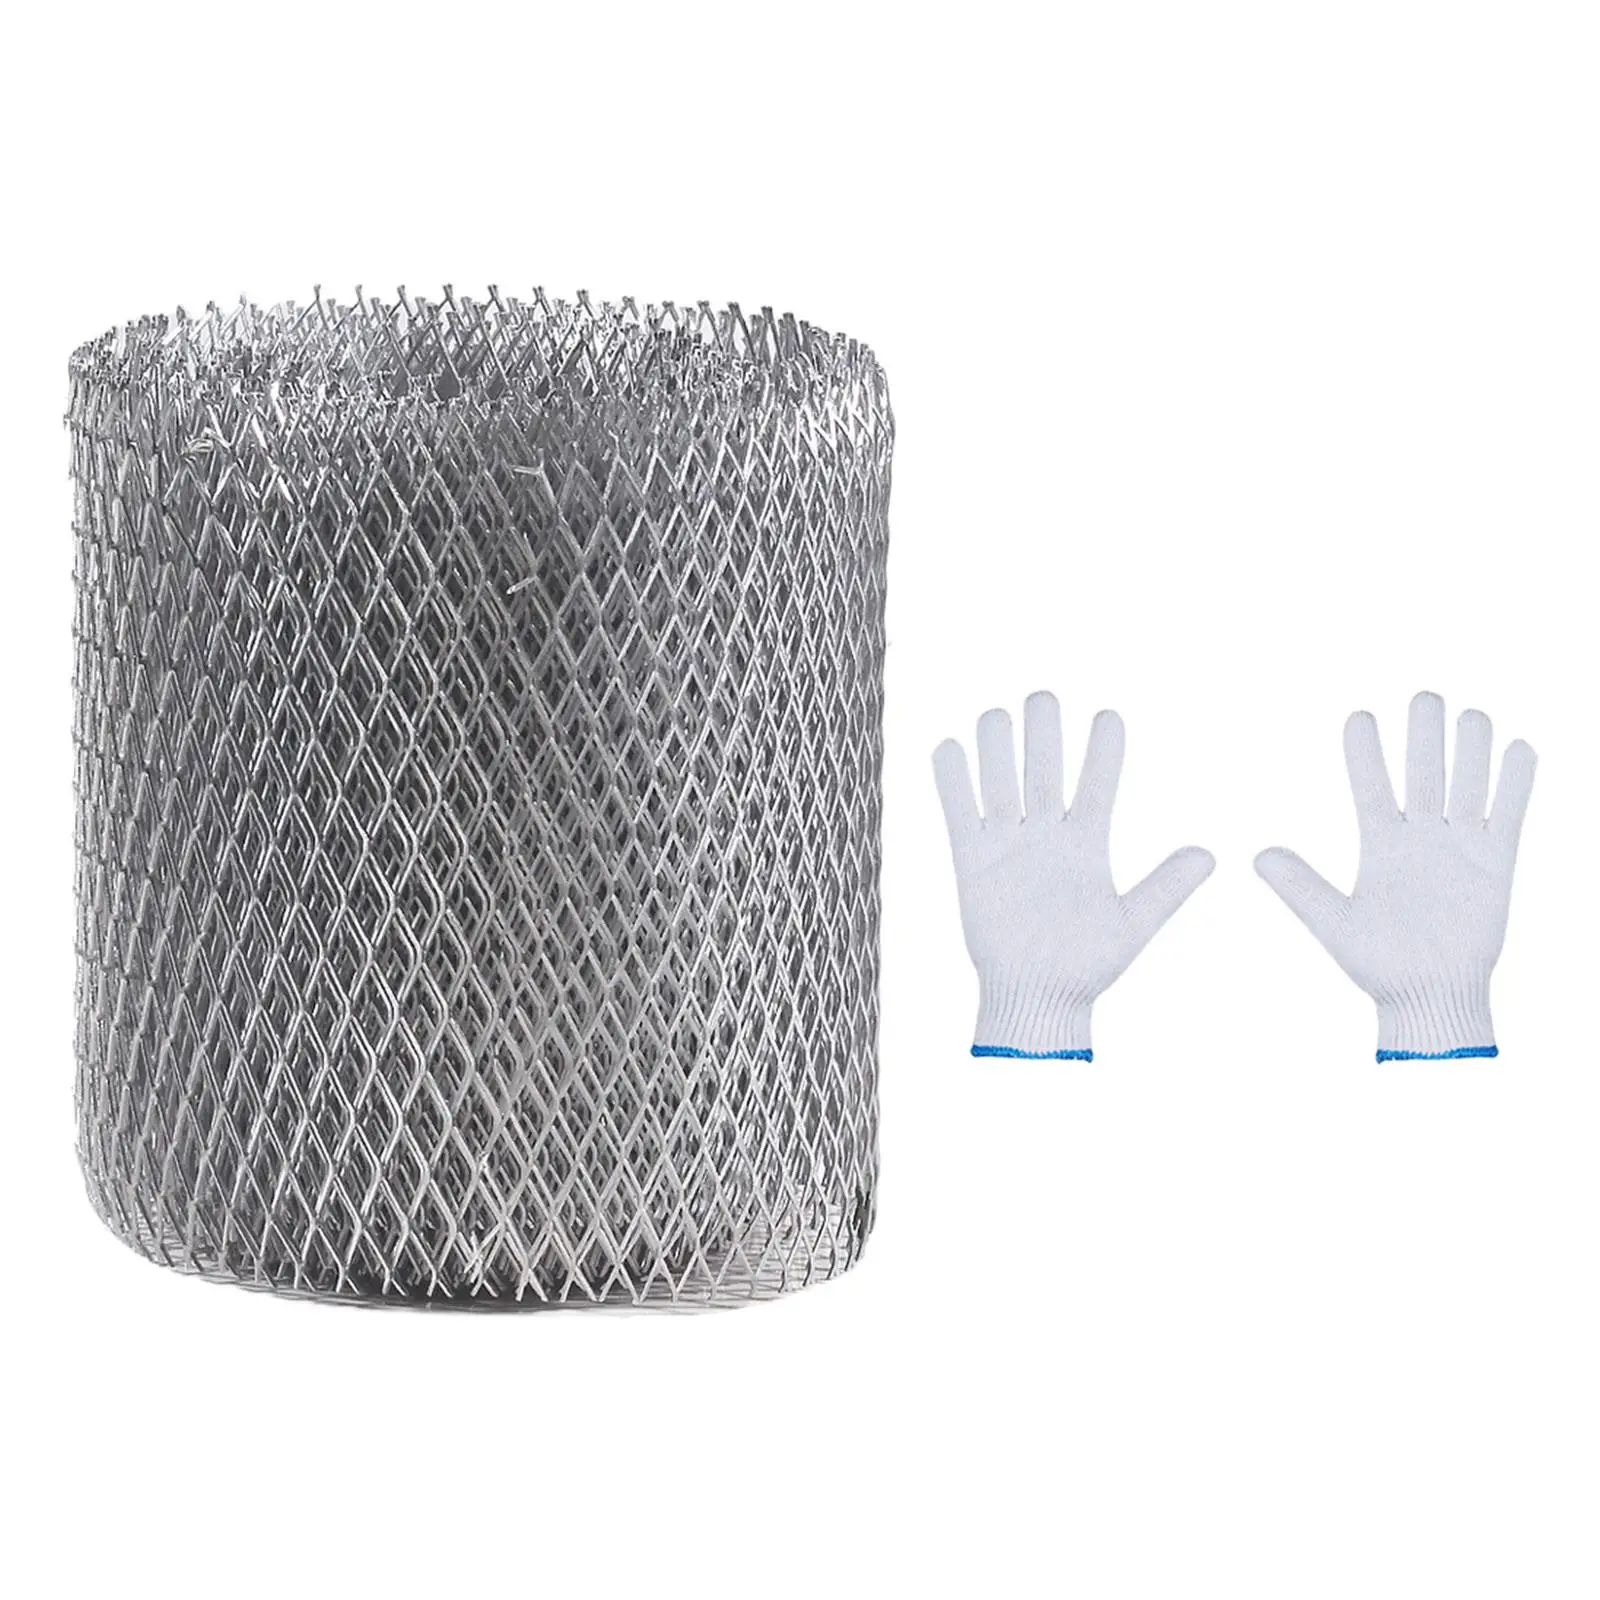 Gutter Guard Mesh Drains Filter Strainer Leaf Prevention Stable Practical with